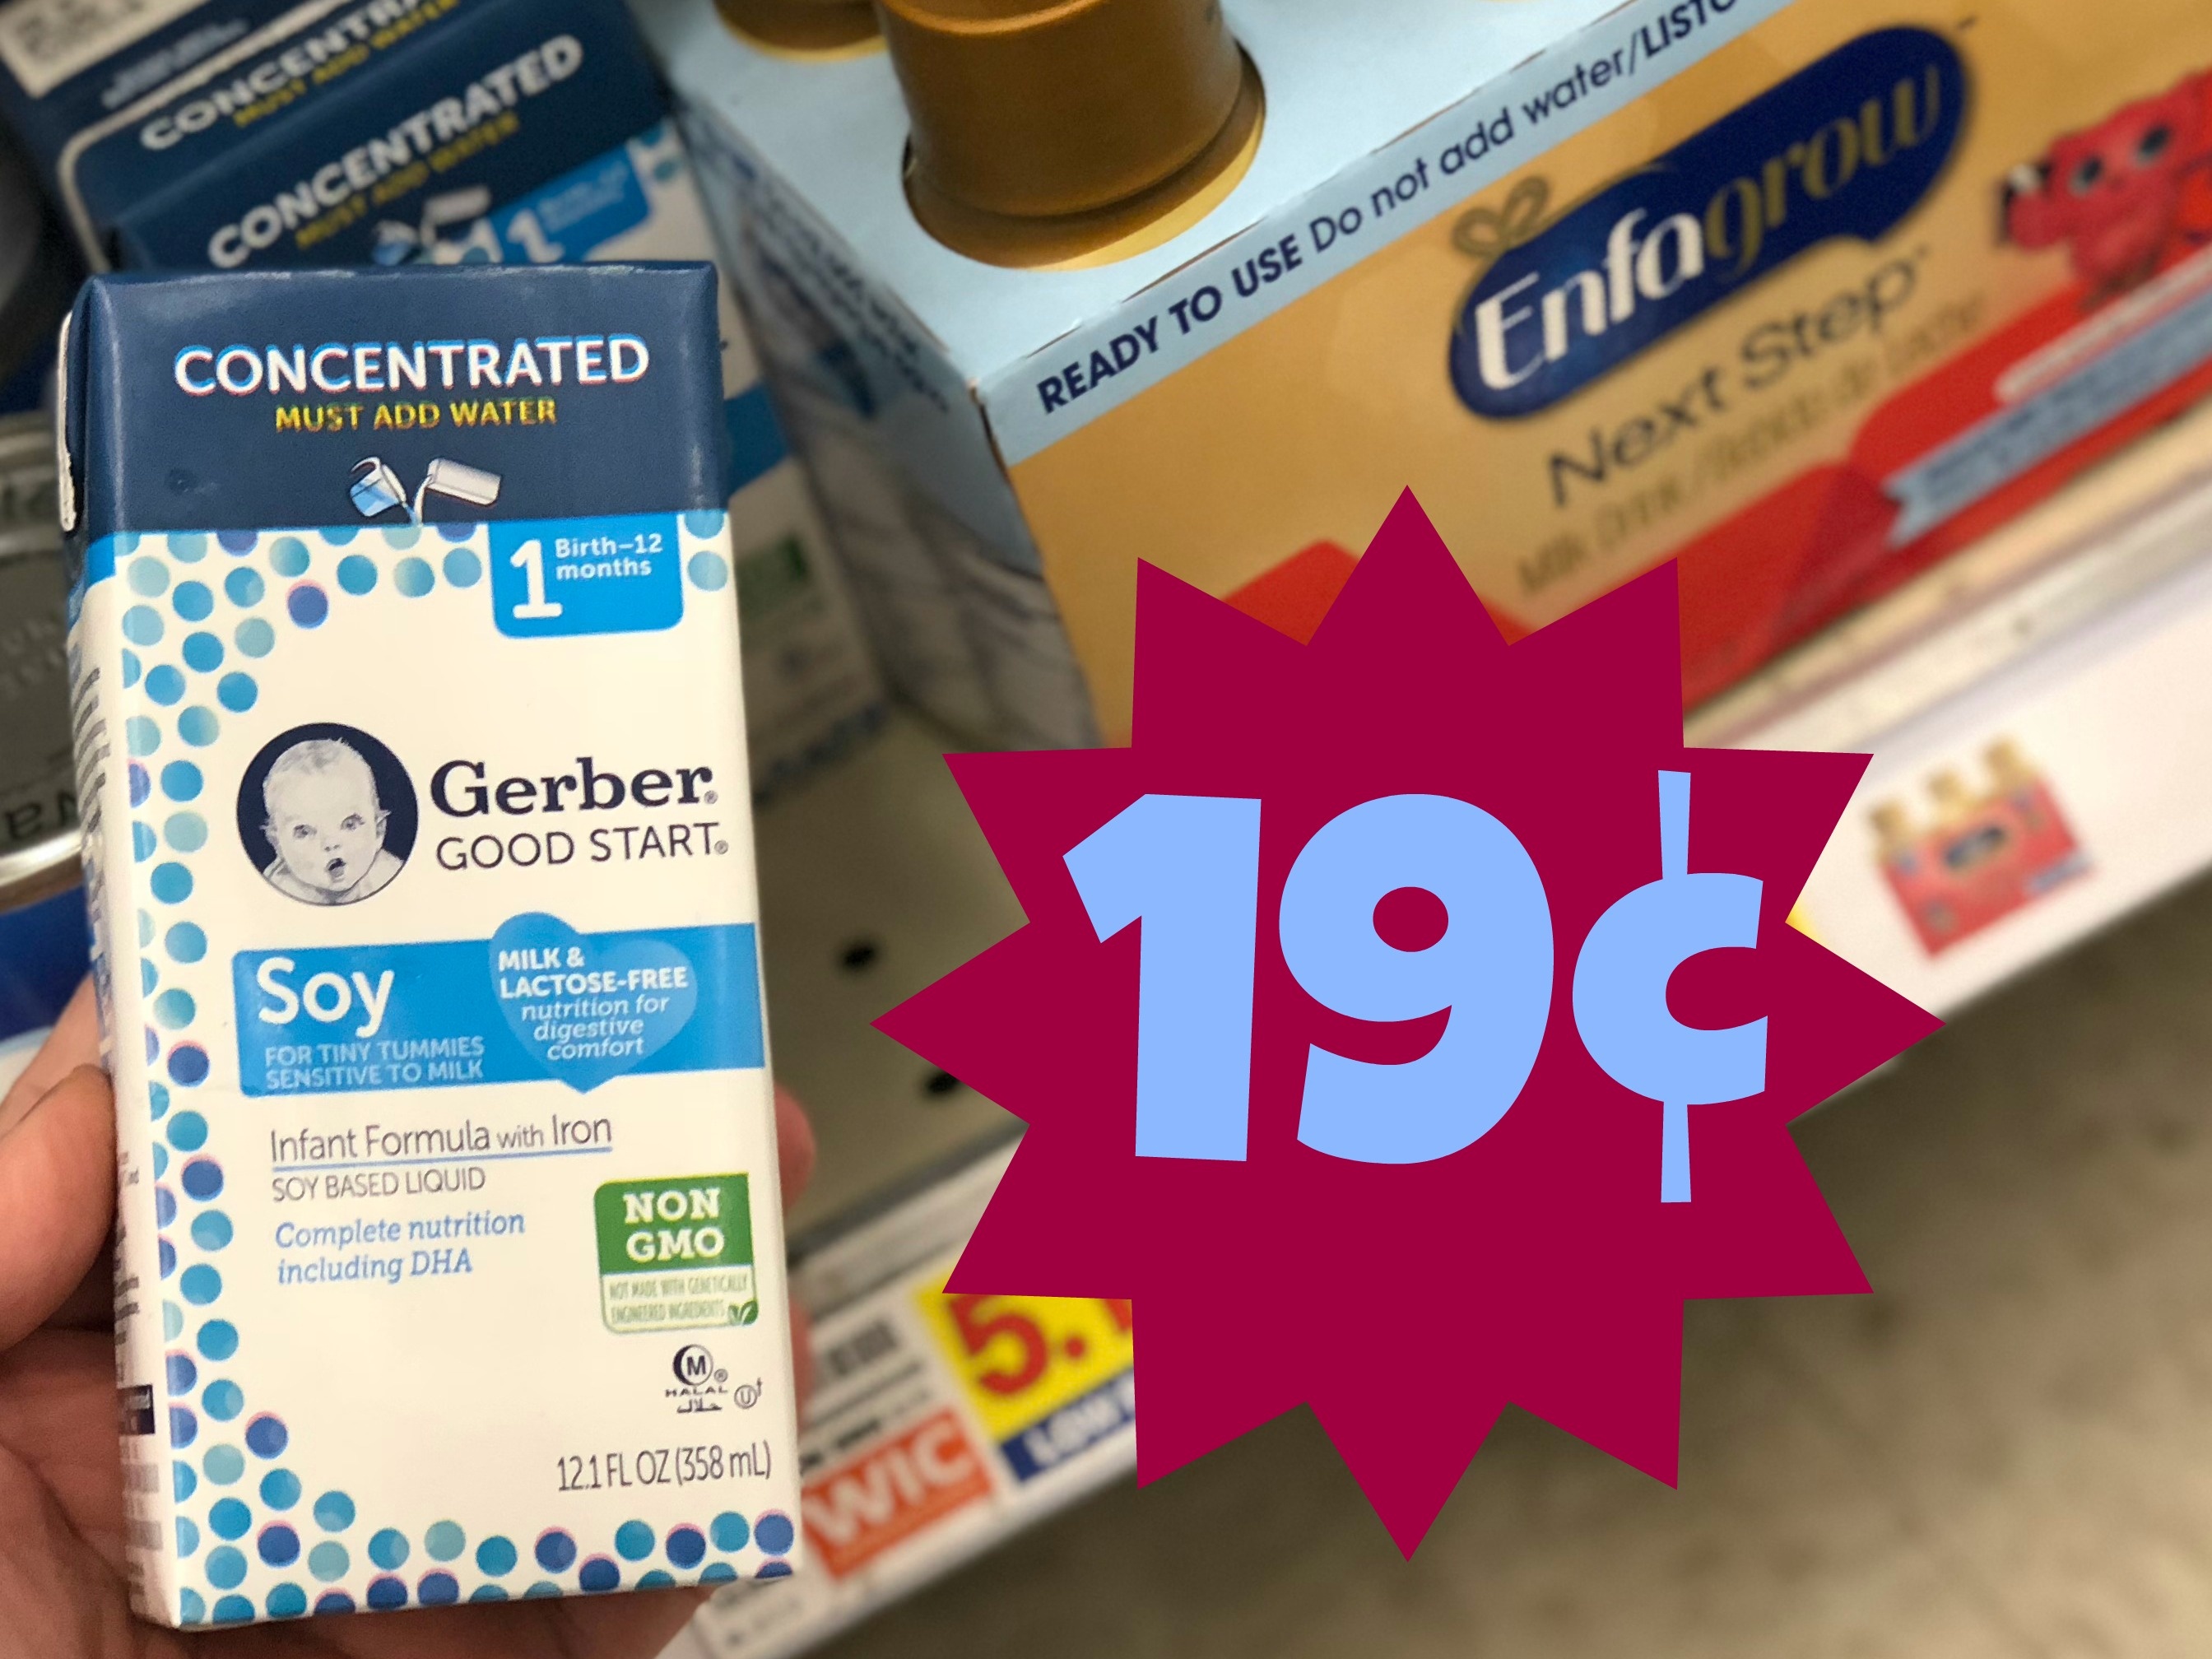 Gerber Good Start Infant Formula With Iron (Concentrated) Only $0.19 - Free Baby Formula Coupons Printable